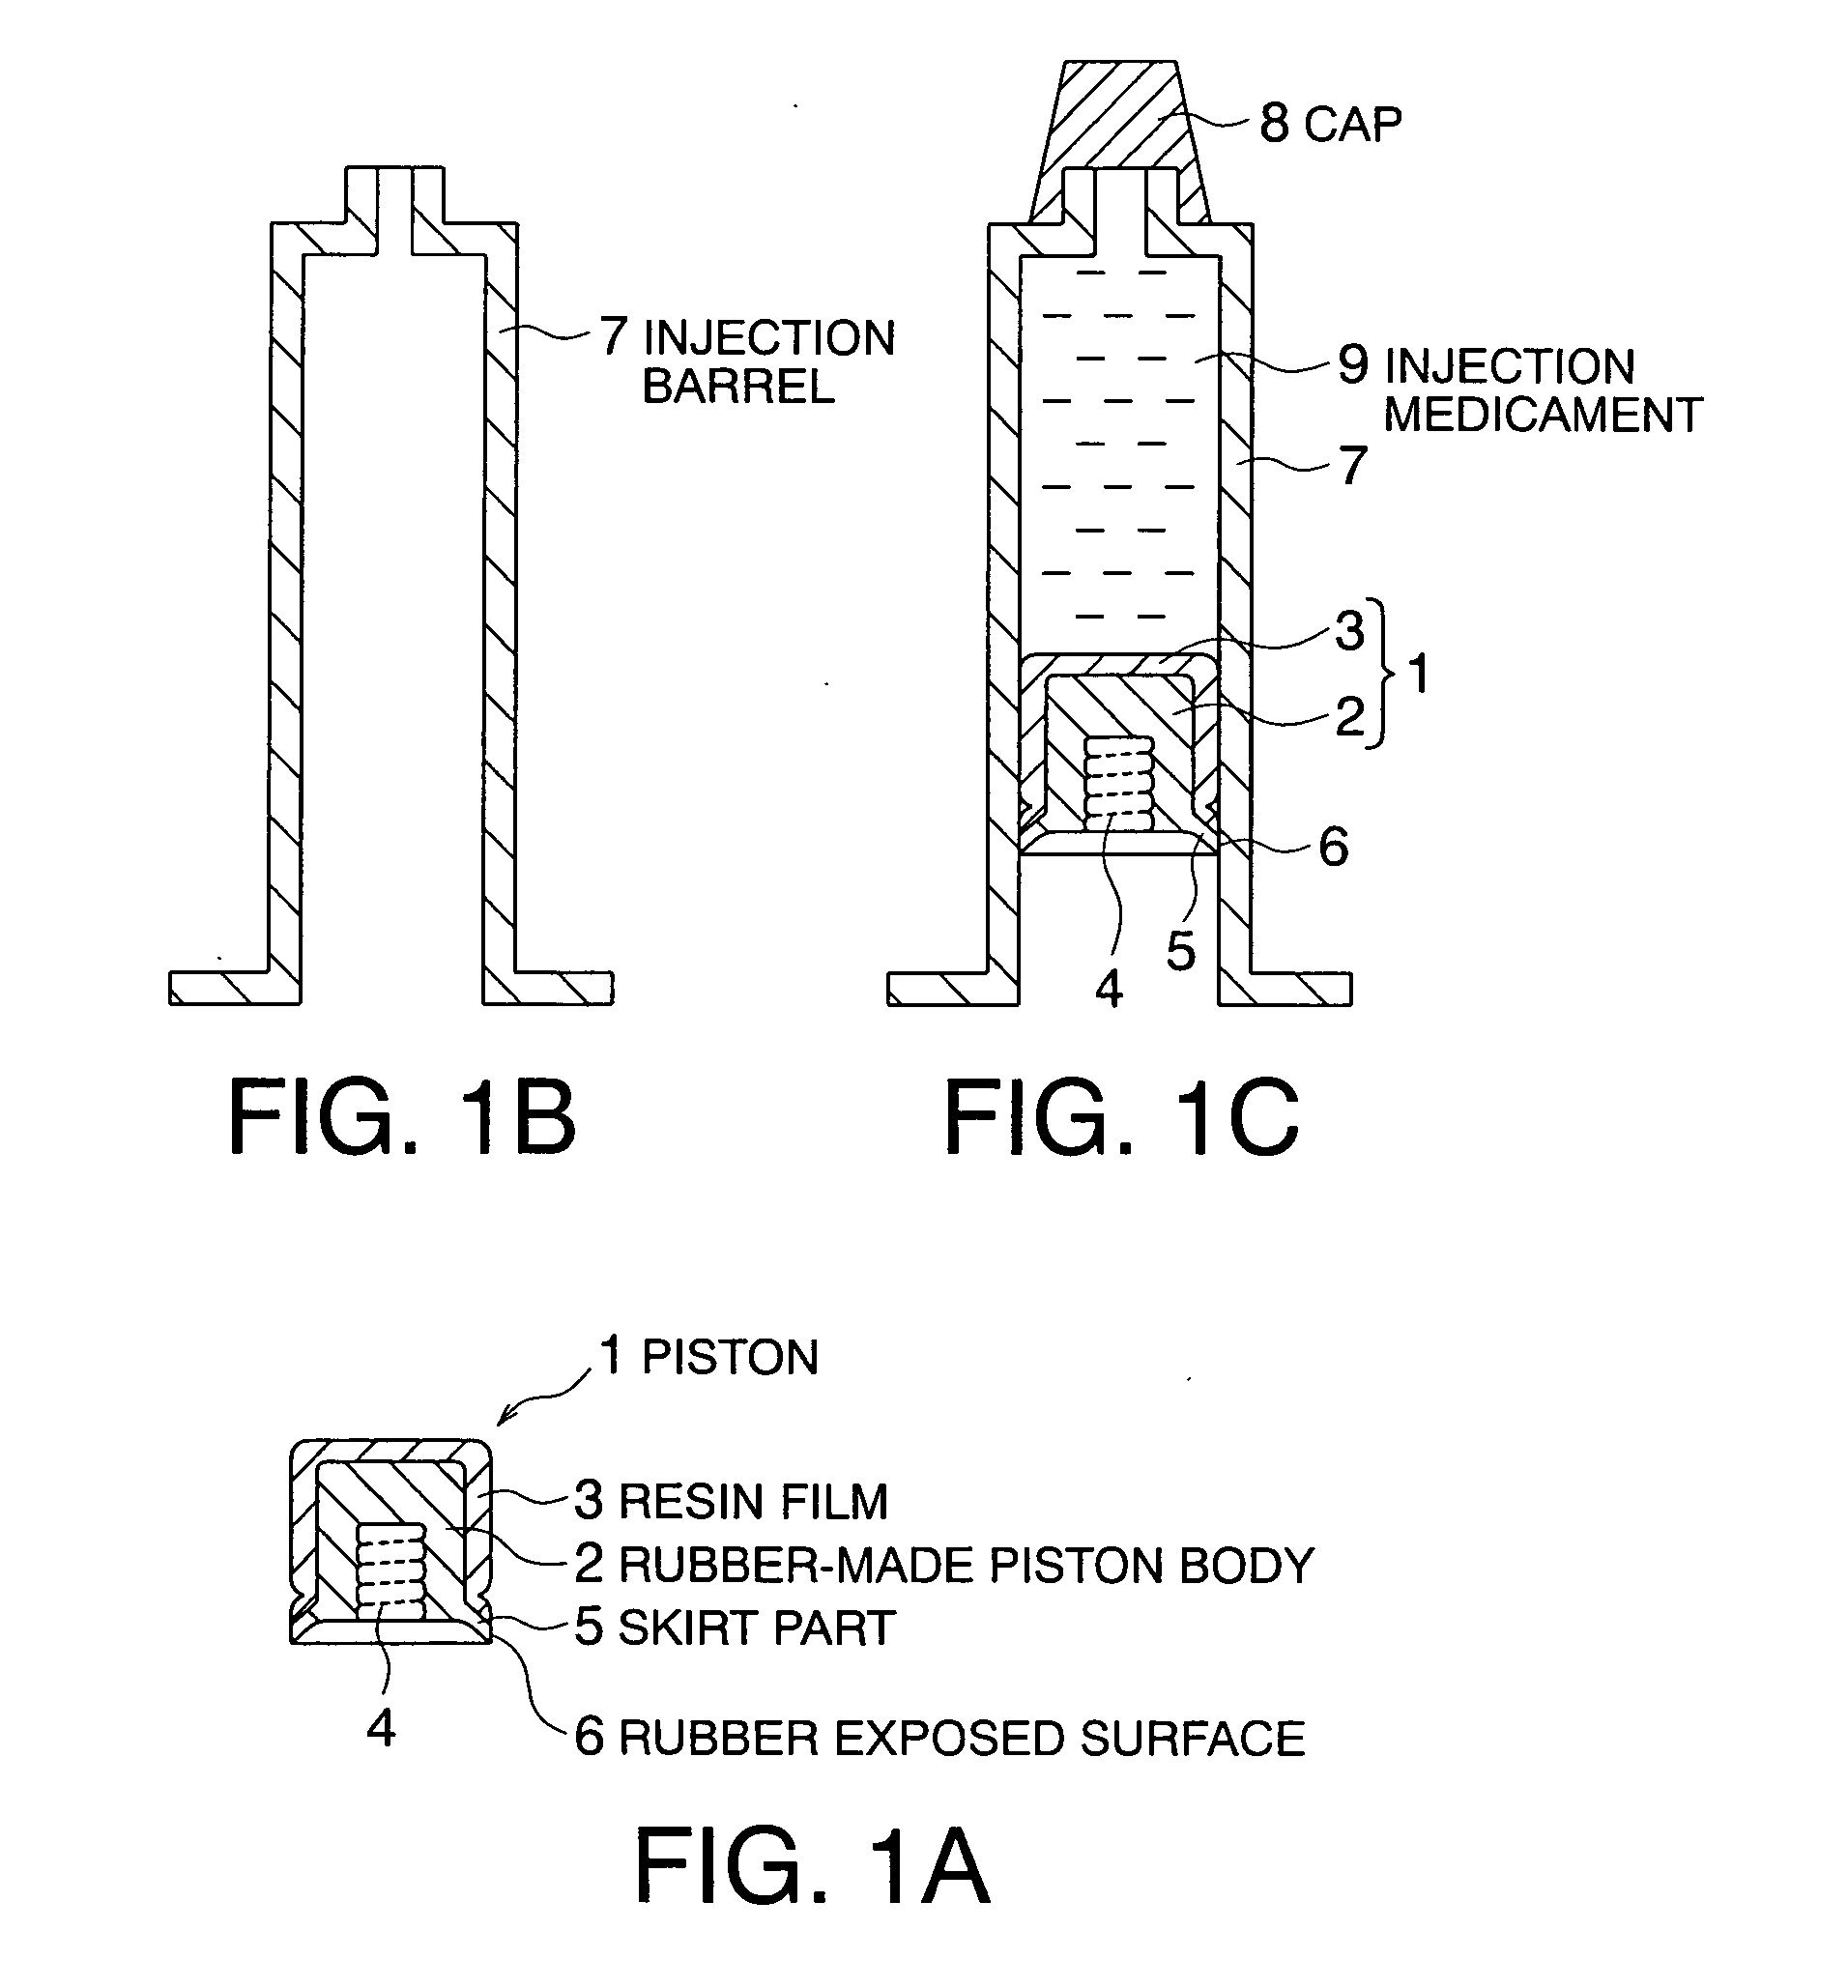 Piston for a syringe and a prefilled syringe using the same